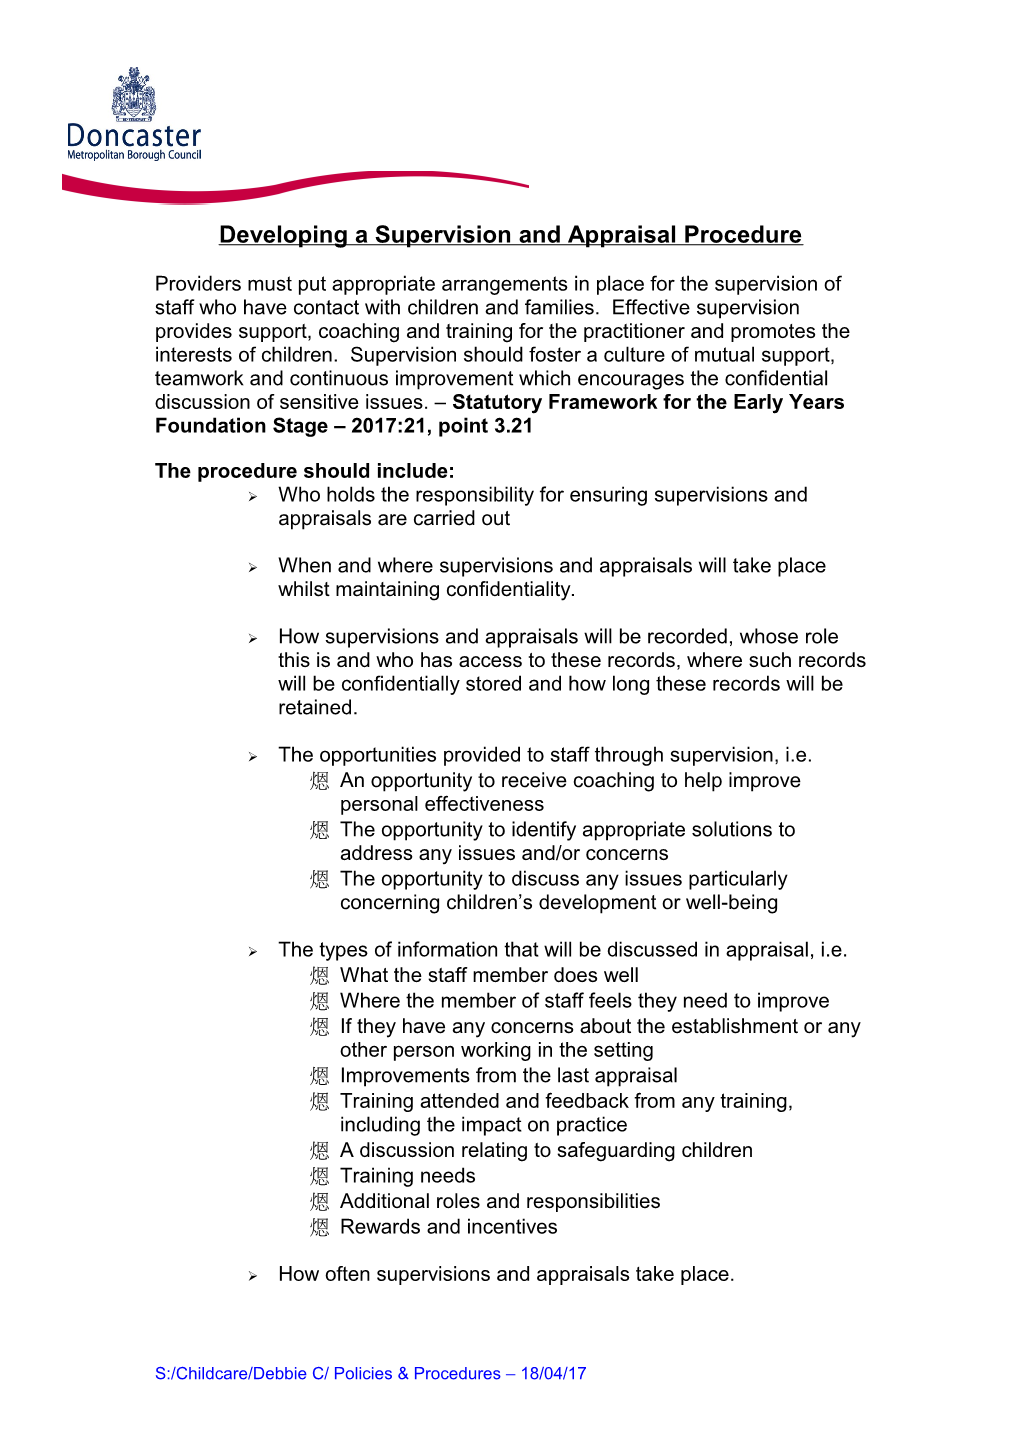 Developing a Supervision and Appraisal Procedure